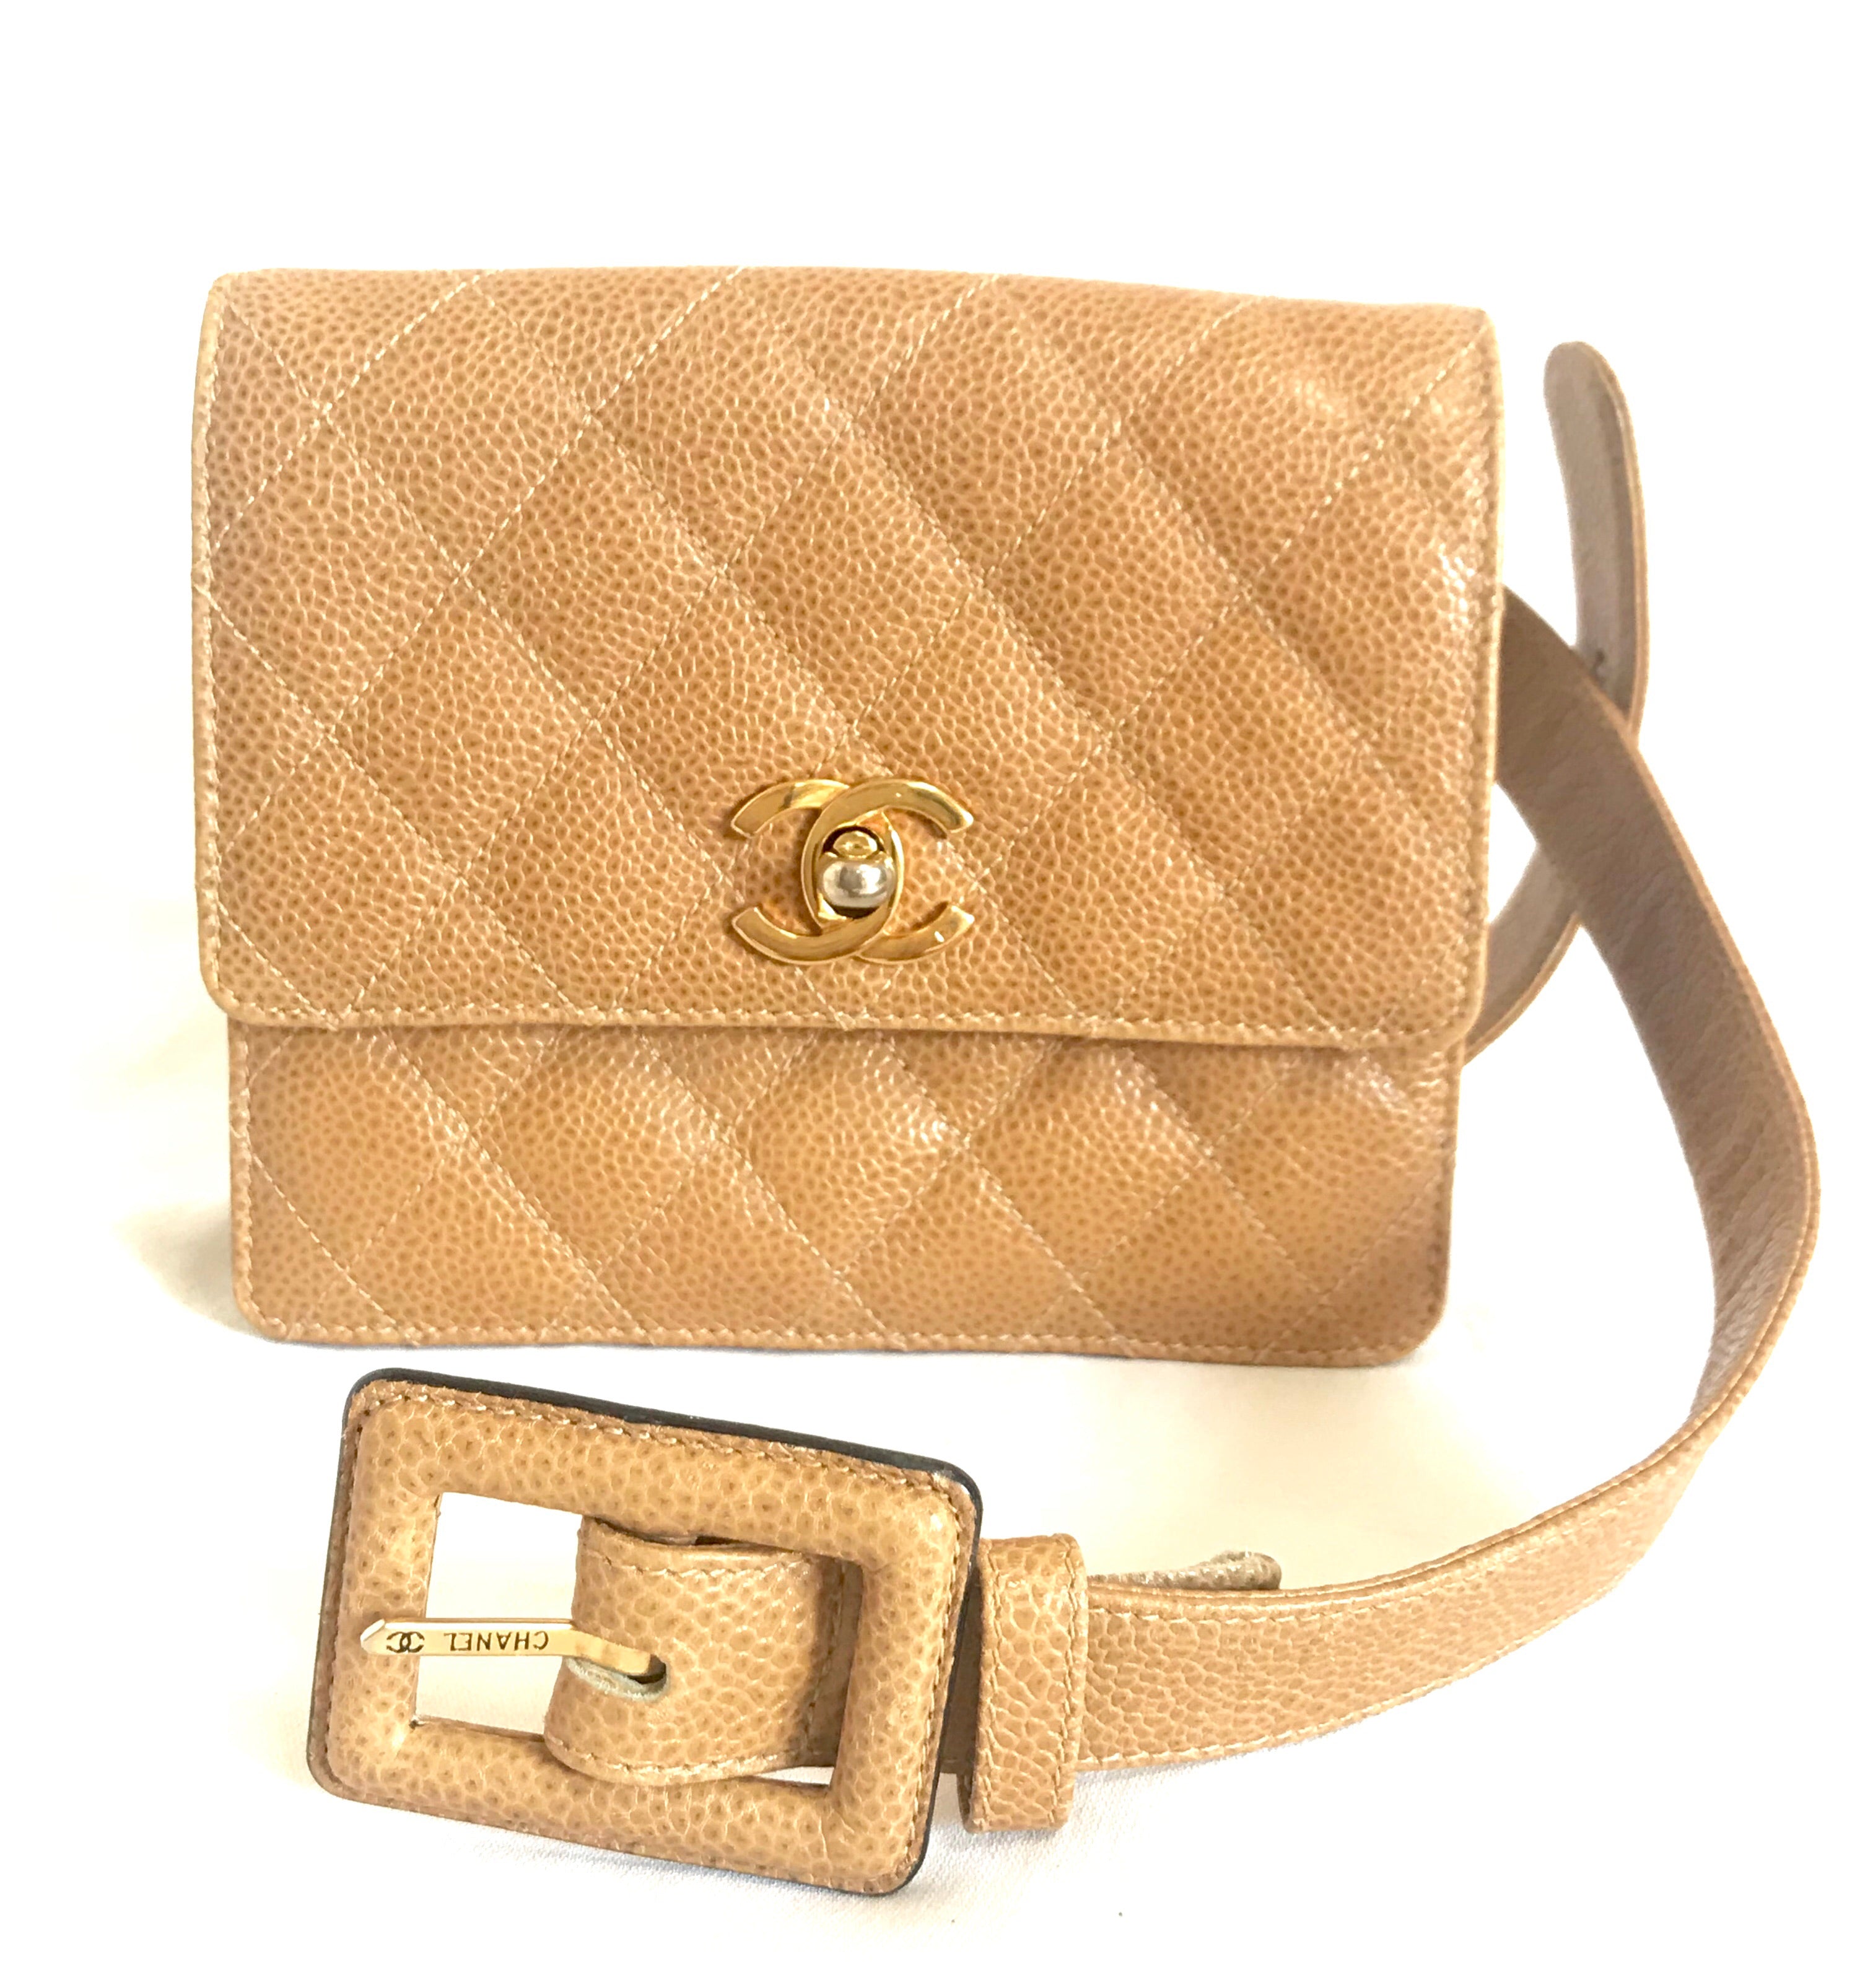 Chanel Pouch Bag - 145 For Sale on 1stDibs